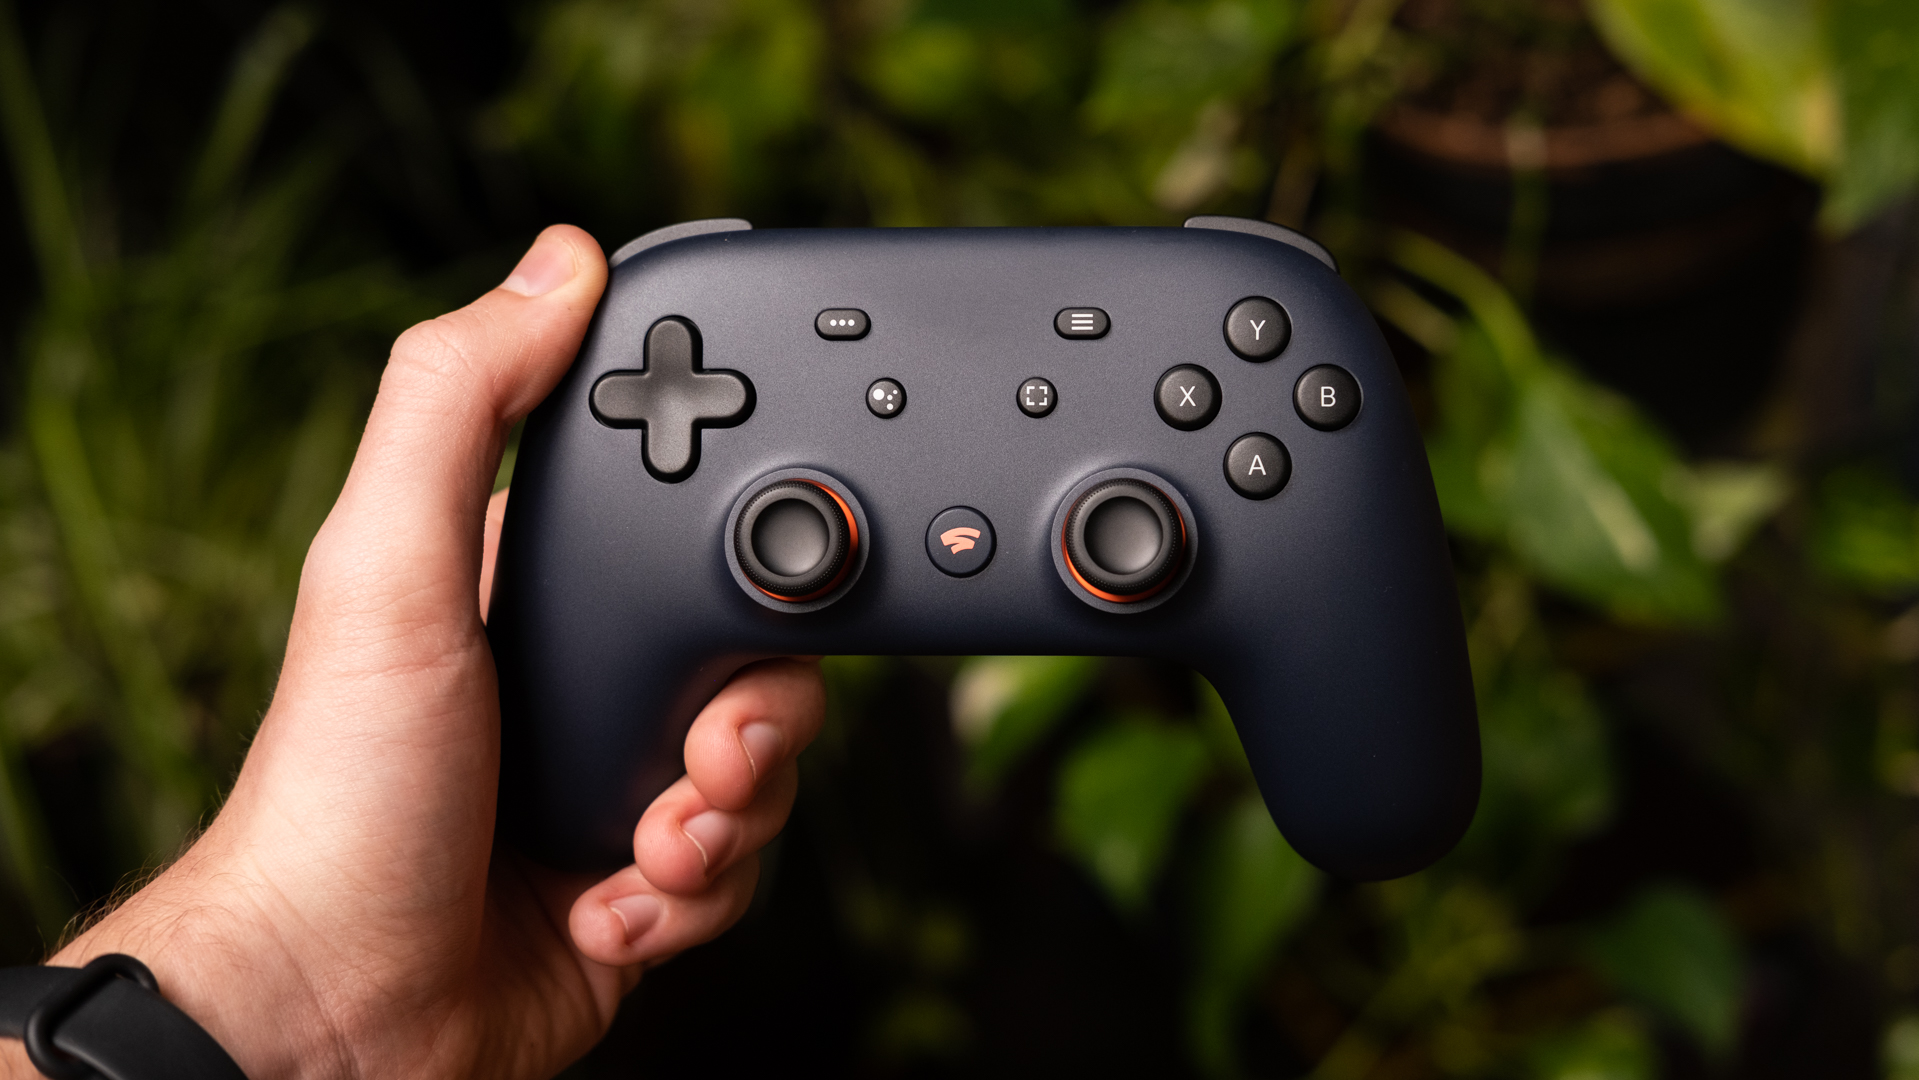 Google Stadia Founders Edition controller in hand